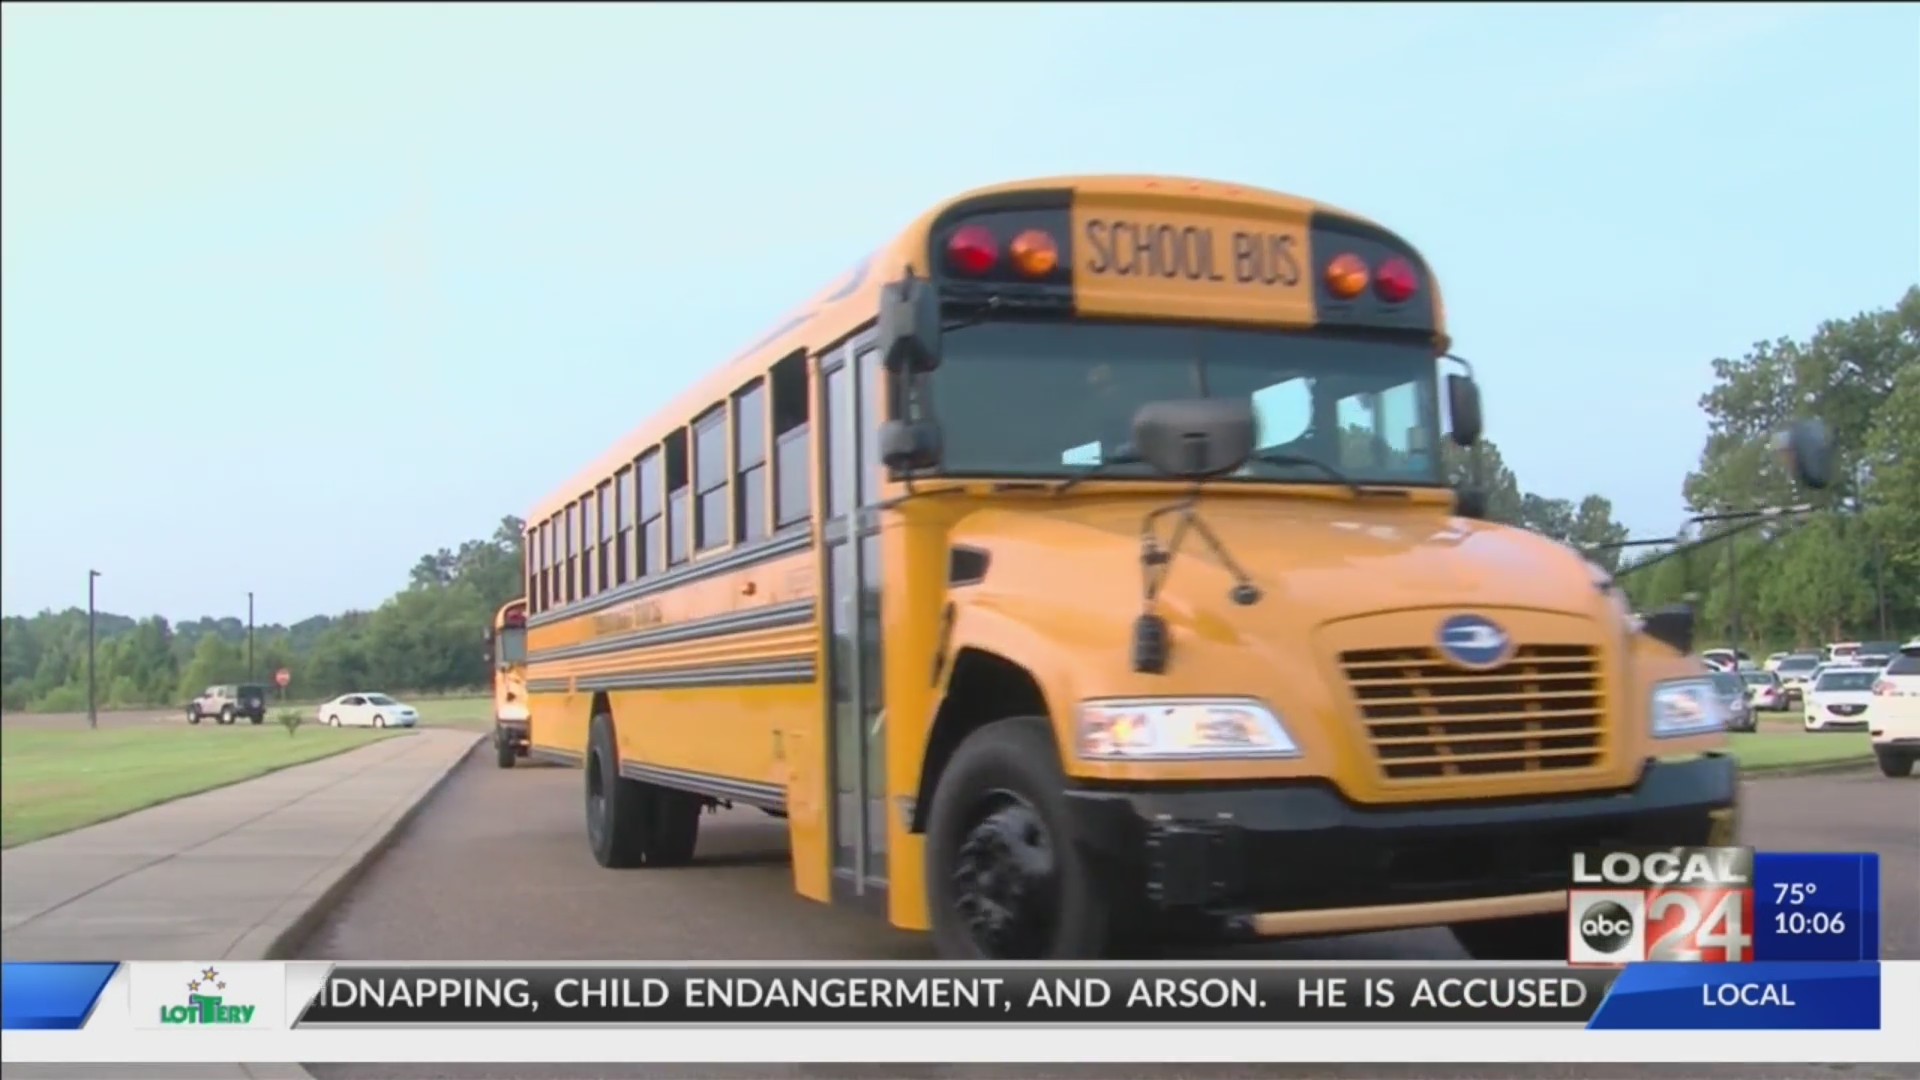 Parents concerned for their children in school buses with no air conditioning during hot weather conditions